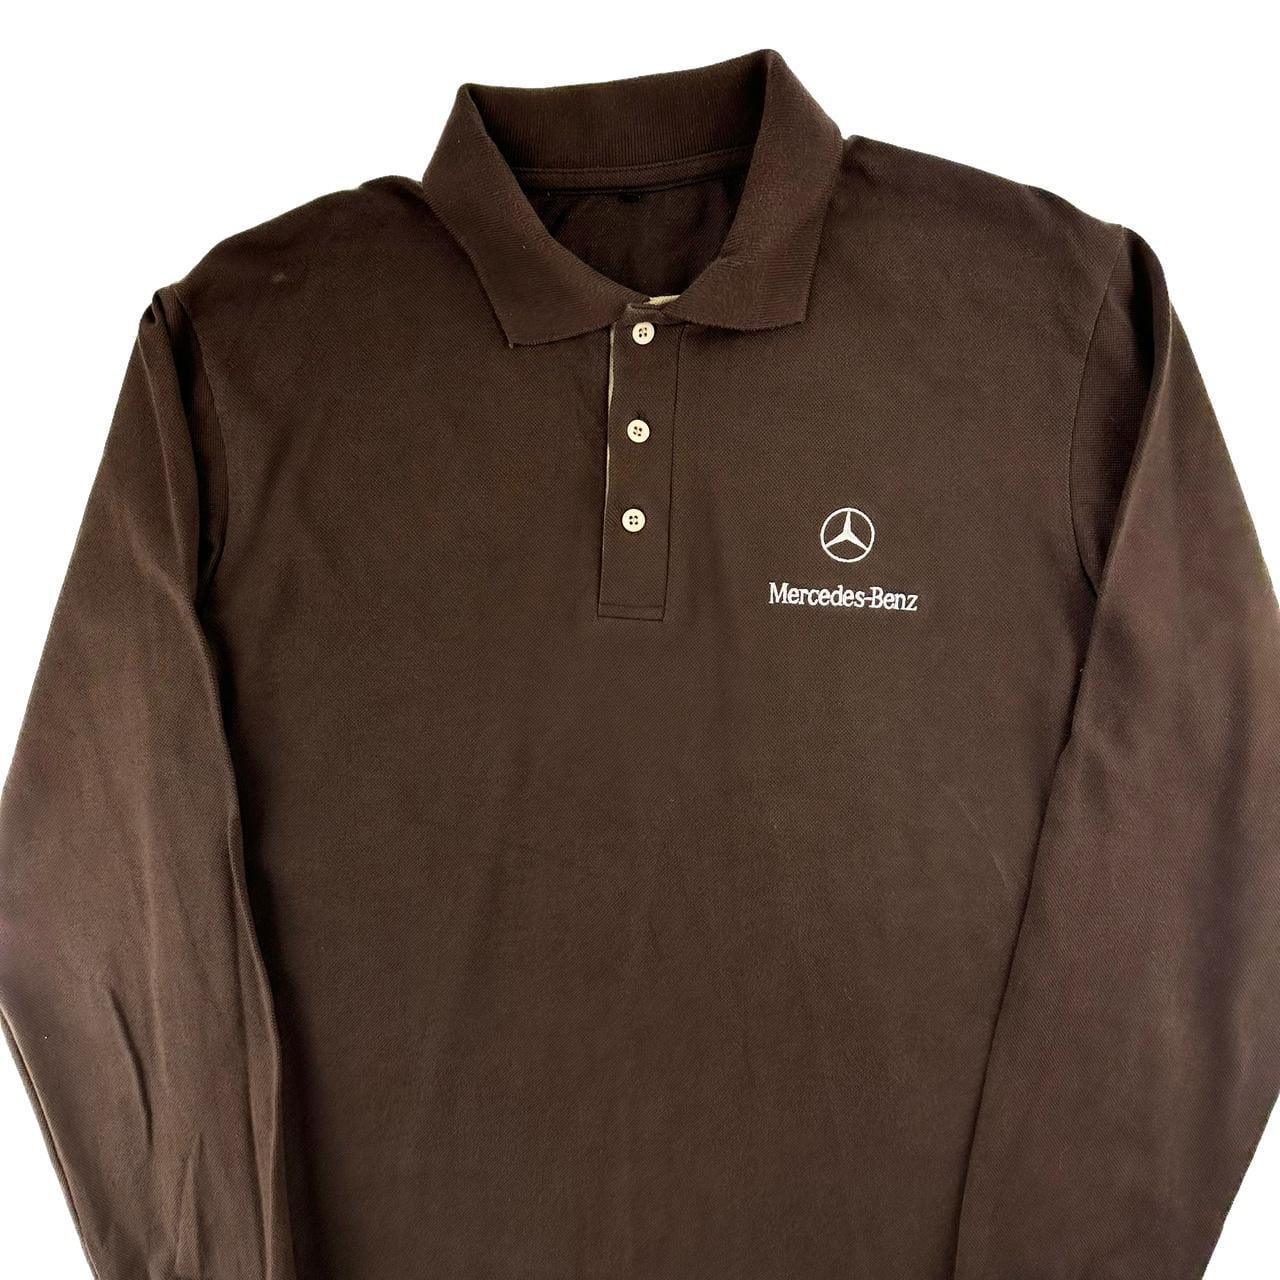 Mercedes long sleeve polo shirt size M - Known Source